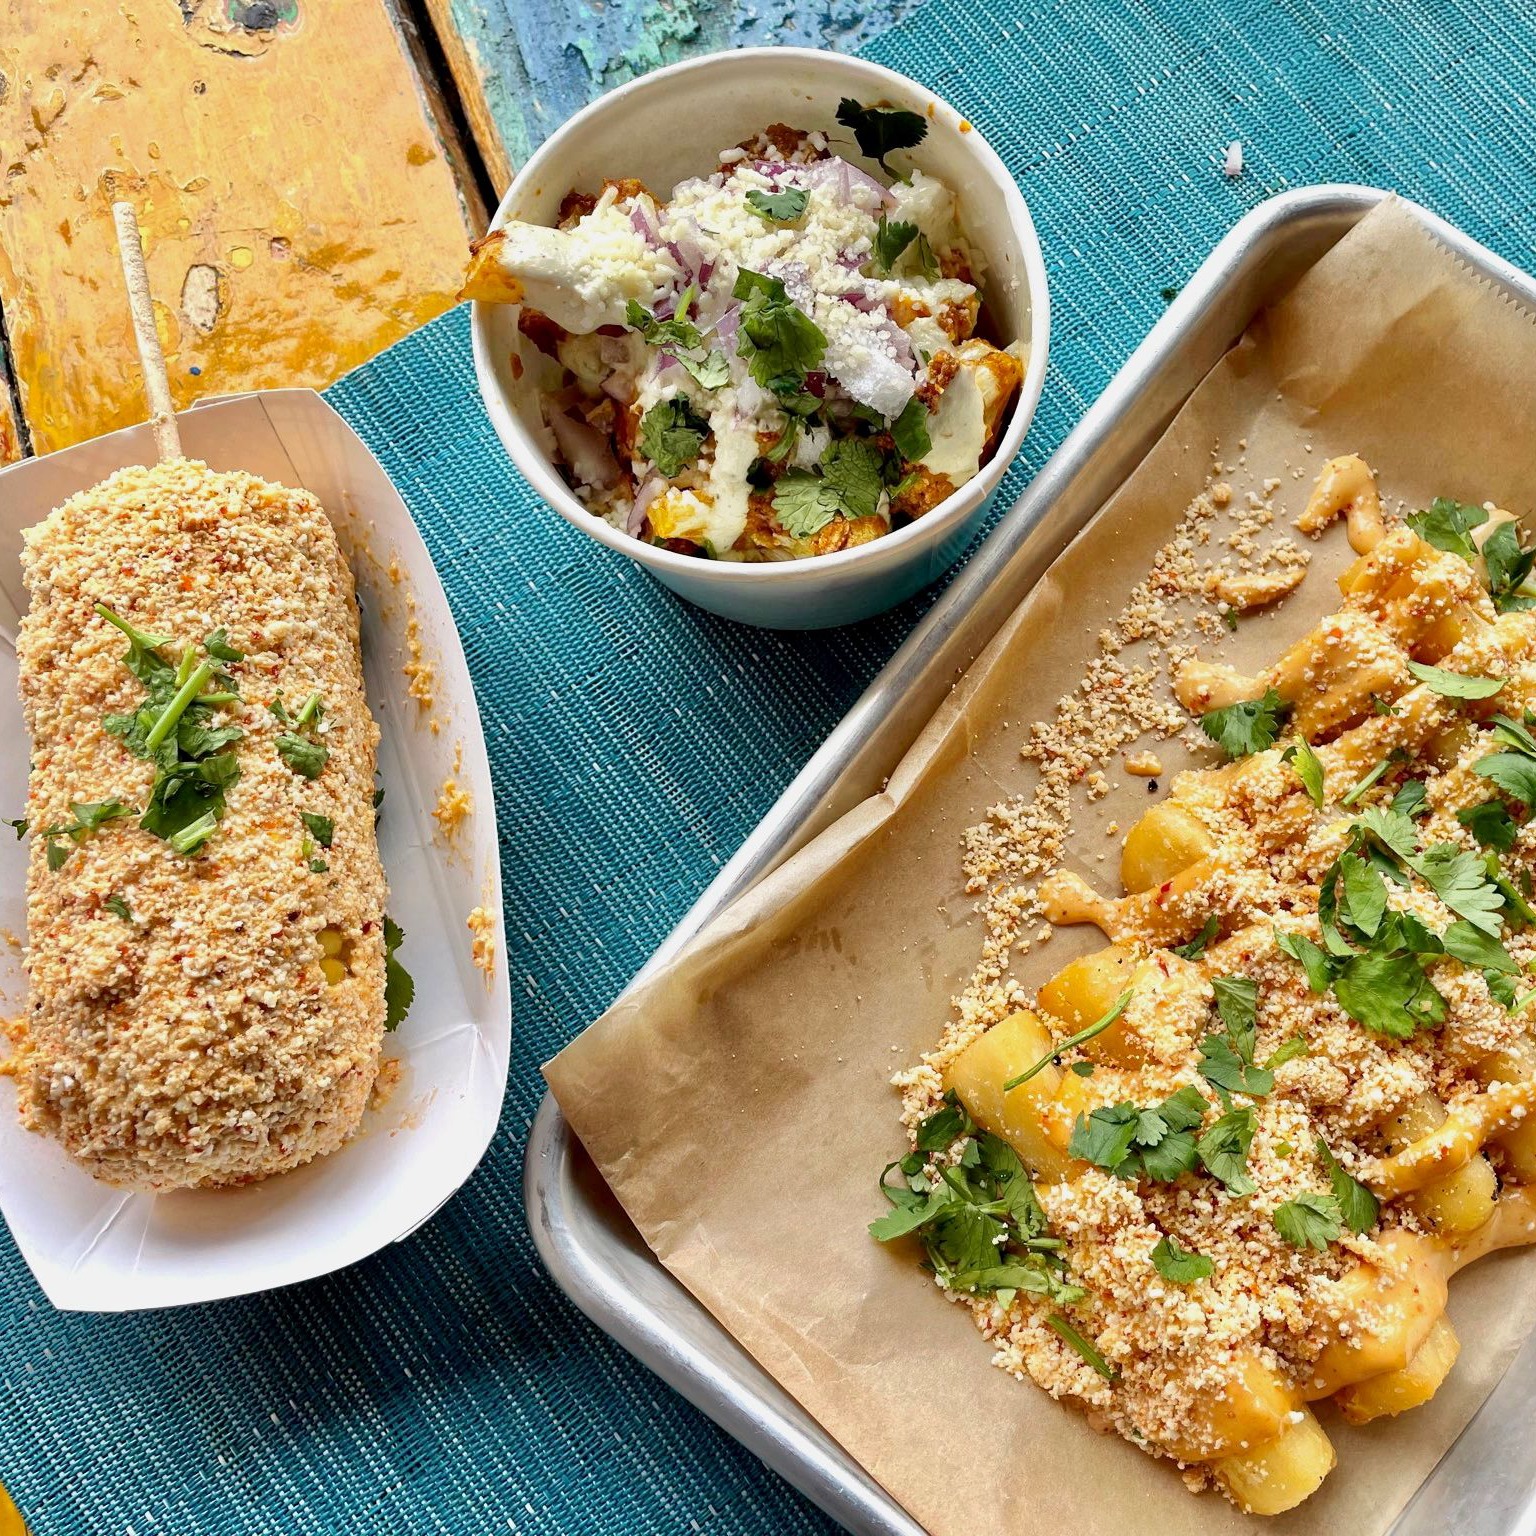 Have you tried our delicious AVO TACO sides?! 😋
The perfect add on to any meal! 

📍New Hyde Park, LI
📍Bayside, Queens
📍New Orlean, LA

📸 Street Corn, Yuca Fries, 'Flower Cup 🥑🌮

 #longislandeats #newyorkfood #bowls #lifoodfinds #longislandrestaurants #specials #longisland #cocktails #longislandfoodie #queens #queensfood #queensfoodie #sides #eats